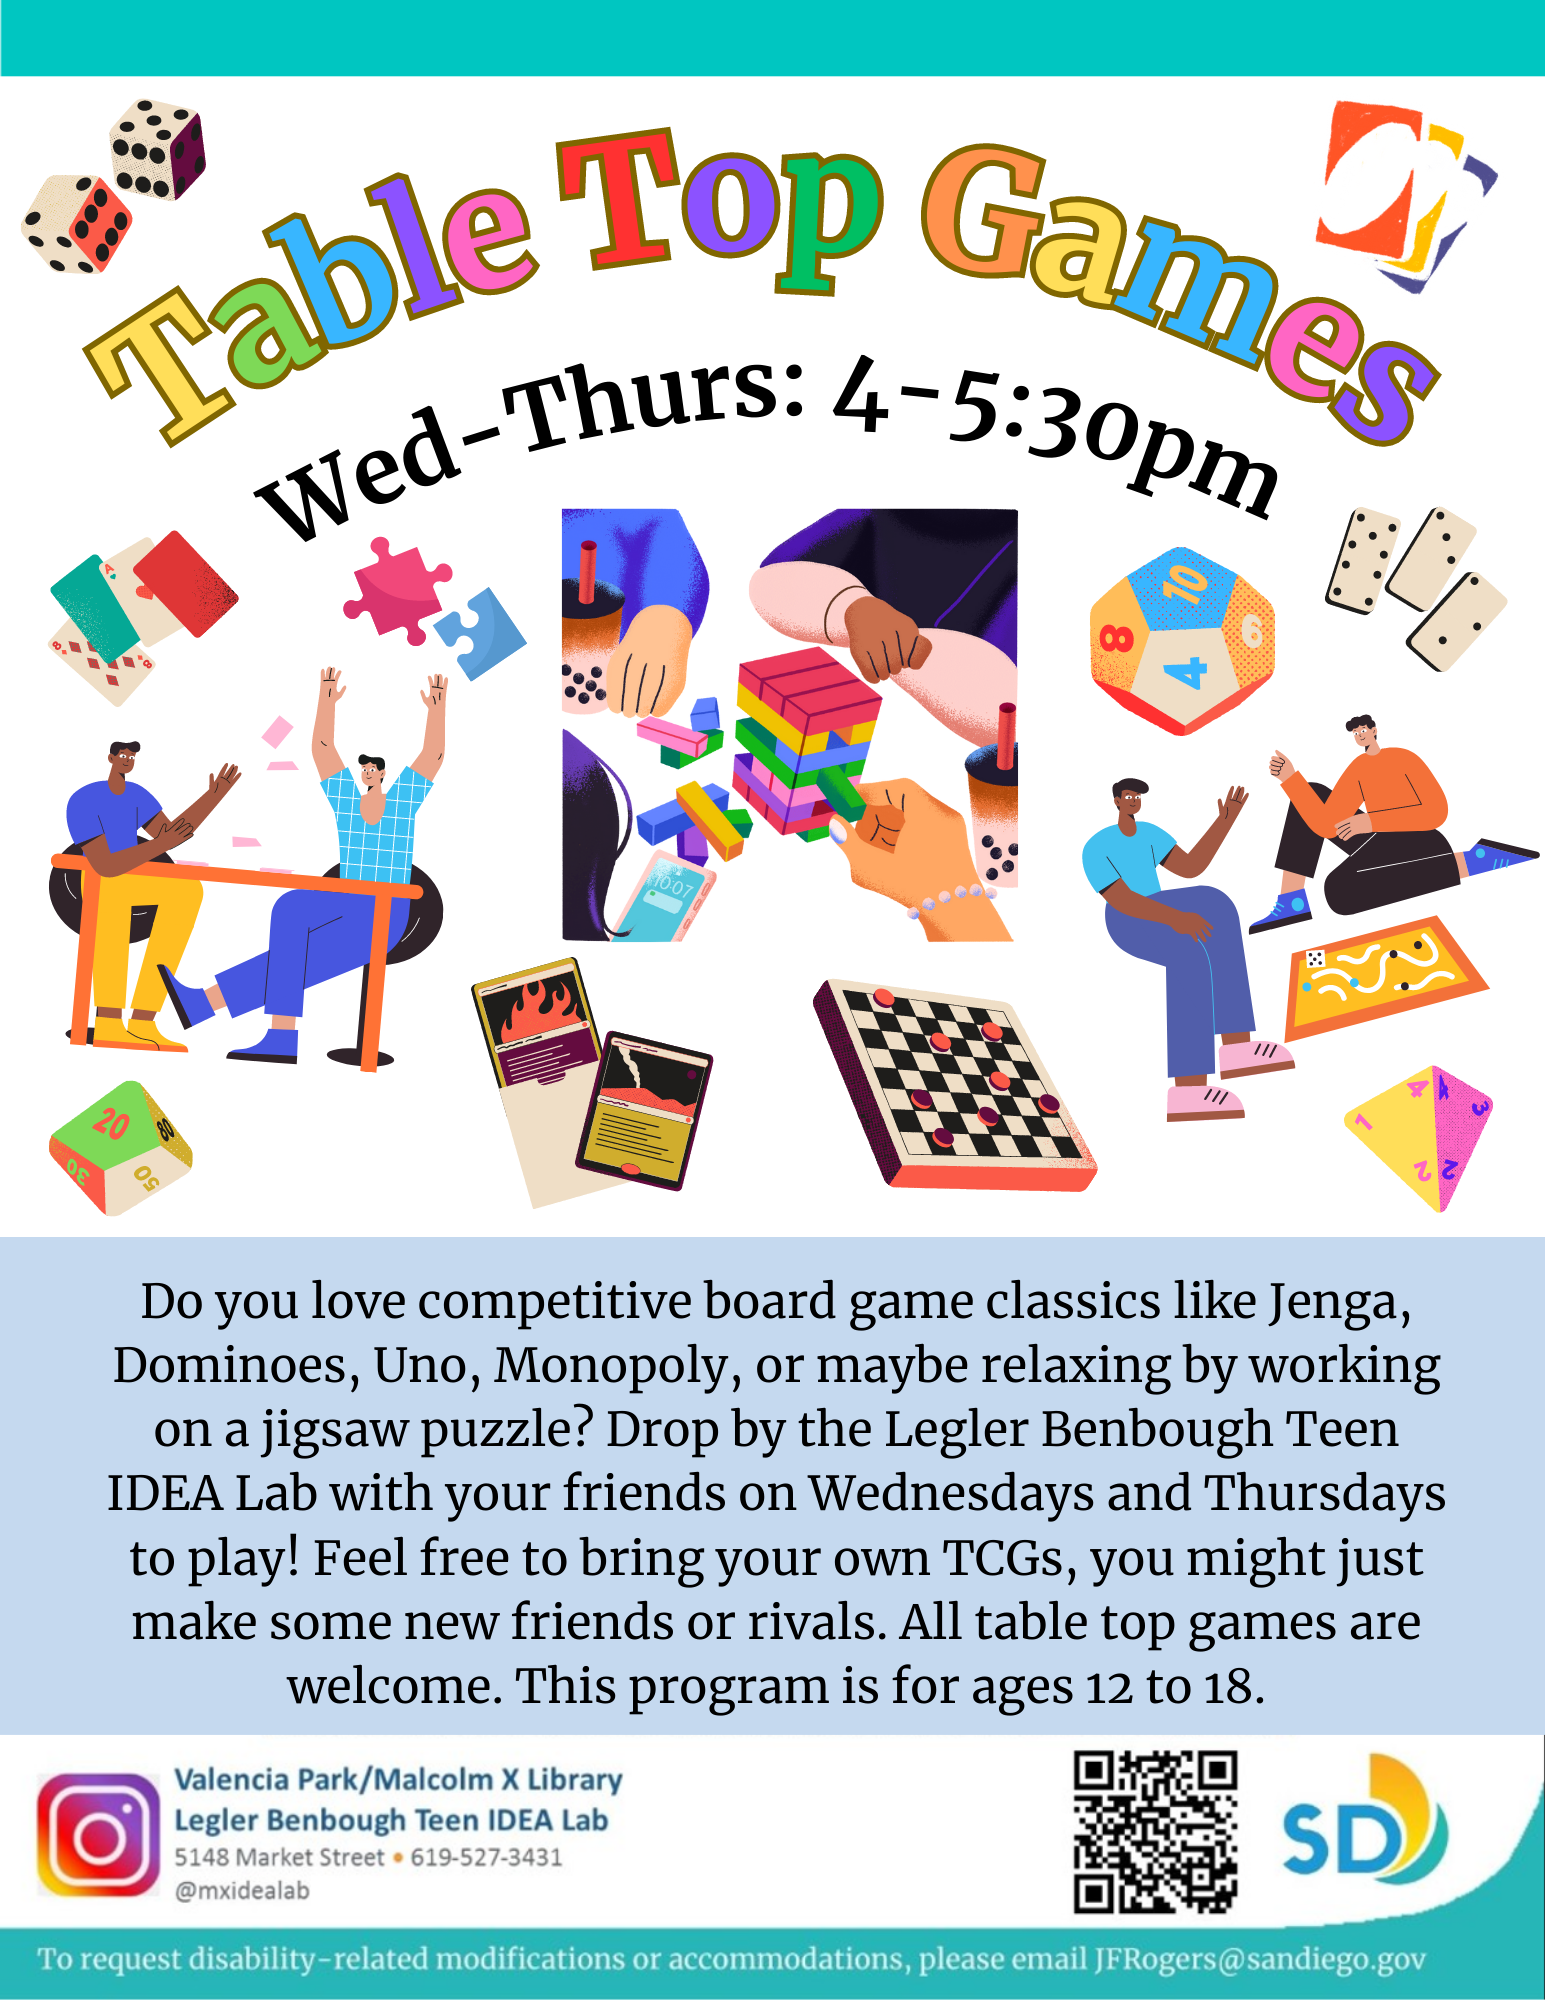 Flyer for Table Top Games. Images of jigsaw puzzle pieces, dice, uno cards, dominoes, checkerboard, and people playing board games.